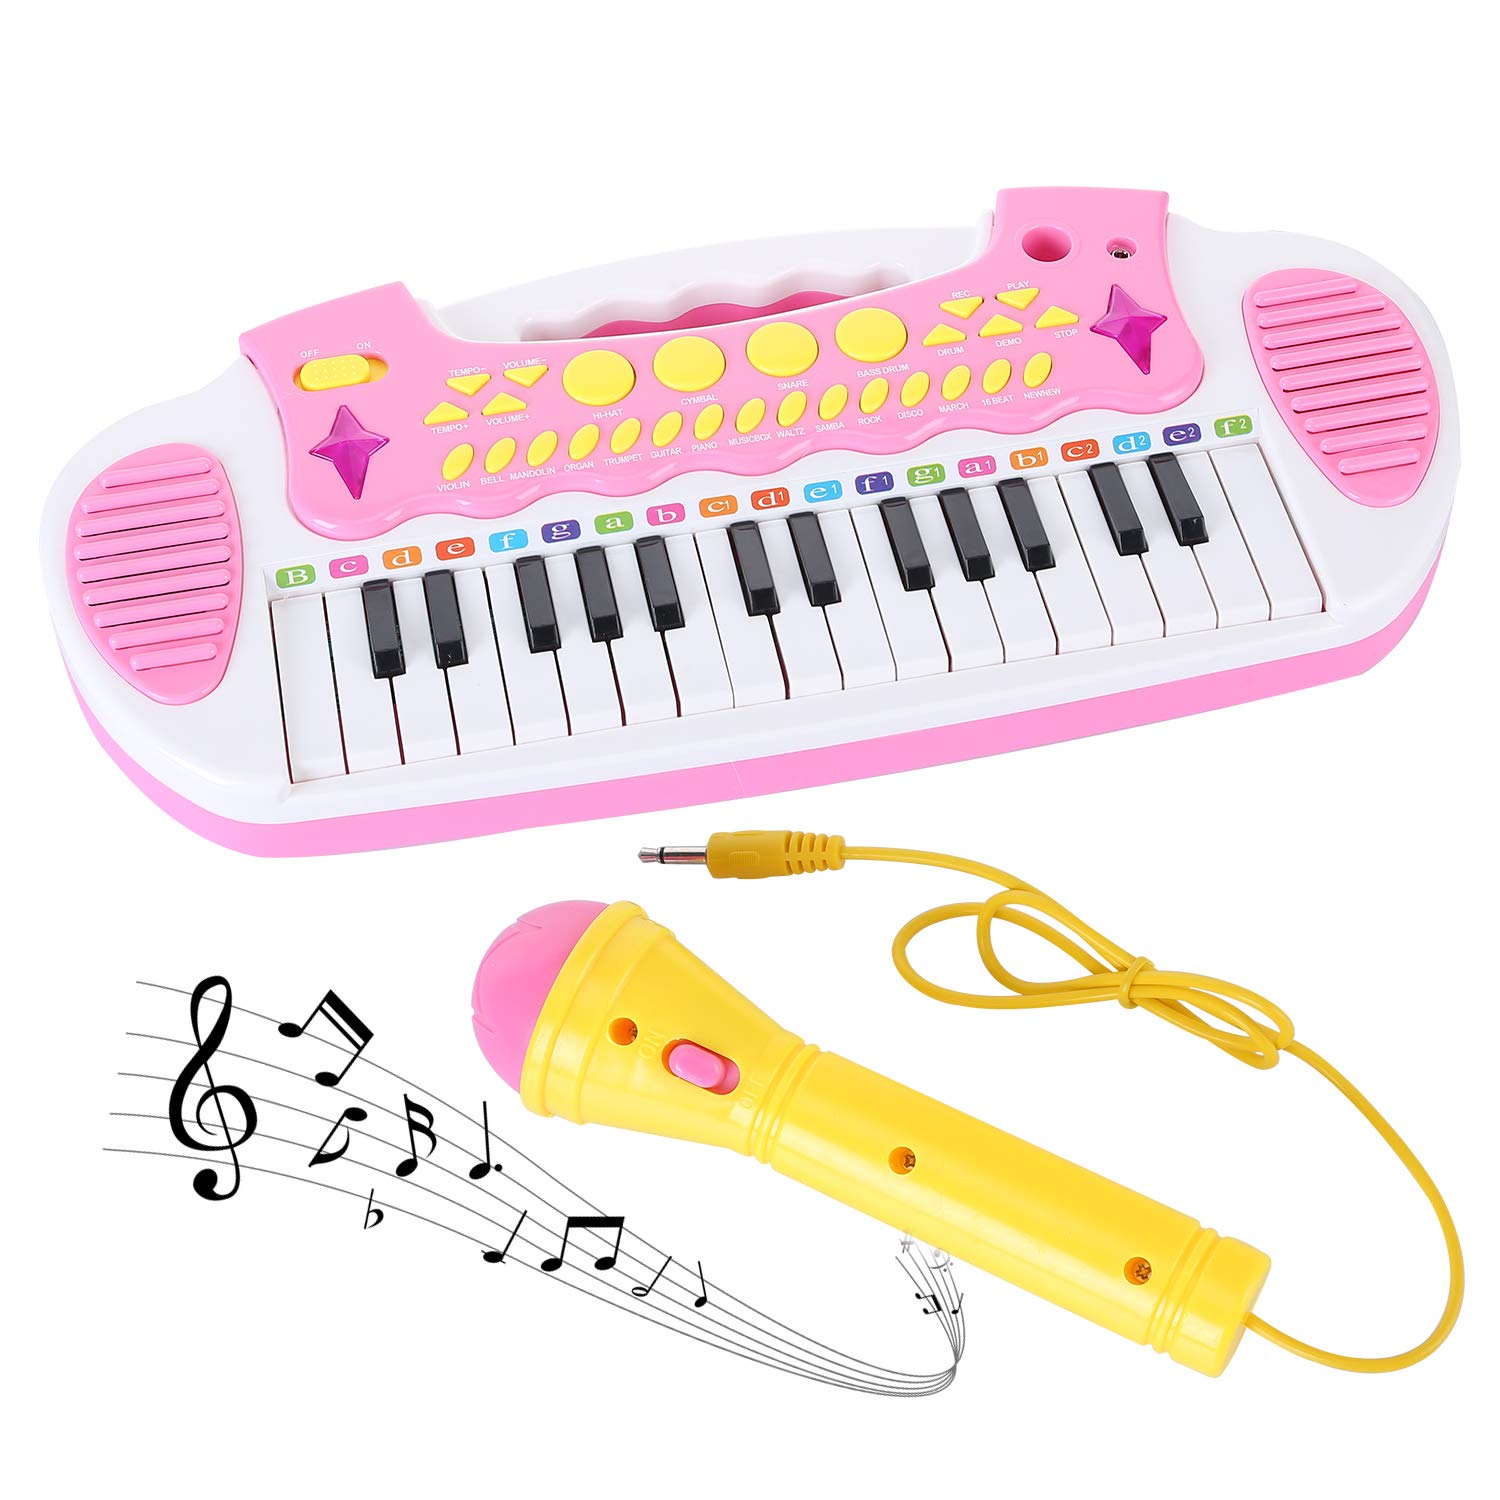 Love&Mini Piano Toy Keyboard for Kids - Birthday gifts for 1 2 3 4 5 Years Old girls Toys with 31 Keys and Microphone Musical In